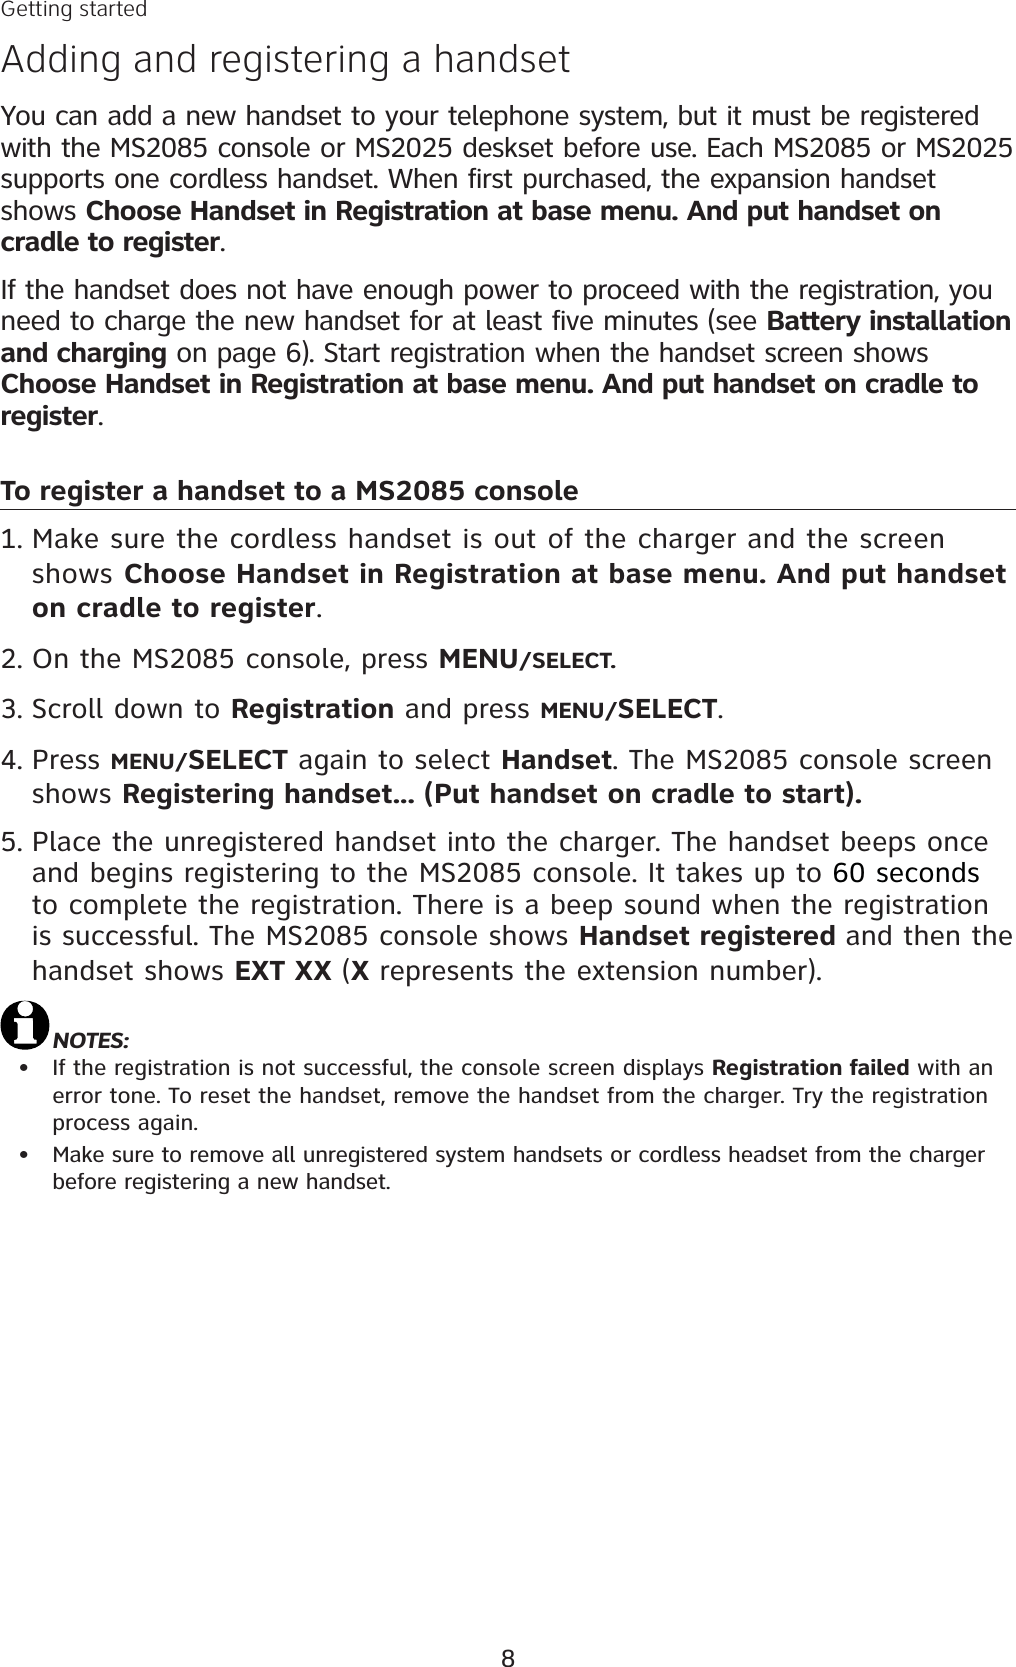 8You can add a new handset to your telephone system, but it must be registered with the MS2085 console or MS2025 deskset before use. Each MS2085 or MS2025 supports one cordless handset. When first purchased, the expansion handset shows Choose Handset in Registration at base menu. And put handset on cradle to register.If the handset does not have enough power to proceed with the registration, you need to charge the new handset for at least five minutes (see Battery installation and charging on page 6). Start registration when the handset screen shows Choose Handset in Registration at base menu. And put handset on cradle to register.To register a handset to a MS2085 consoleMake sure the cordless handset is out of the charger and the screen shows Choose Handset in Registration at base menu. And put handset on cradle to register.On the MS2085 console, press MENU/SELECT.Scroll down to Registration and press MENU/SELECT.Press MENU/SELECT again to select Handset. The MS2085 console screen shows Registering handset... (Put handset on cradle to start).Place the unregistered handset into the charger. The handset beeps onceand begins registering to the MS2085 console. It takes up to 60 secondsto complete the registration. There is a beep sound when the registration is successful. The MS2085 console shows Handset registered and then the handset shows EXT XX (X represents the extension number). NOTES:If the registration is not successful, the console screen displays Registration failed with an error tone. To reset the handset, remove the handset from the charger. Try the registration process again. Make sure to remove all unregistered system handsets or cordless headset from the charger before registering a new handset. 1.2.3.4.5.••Getting startedAdding and registering a handset